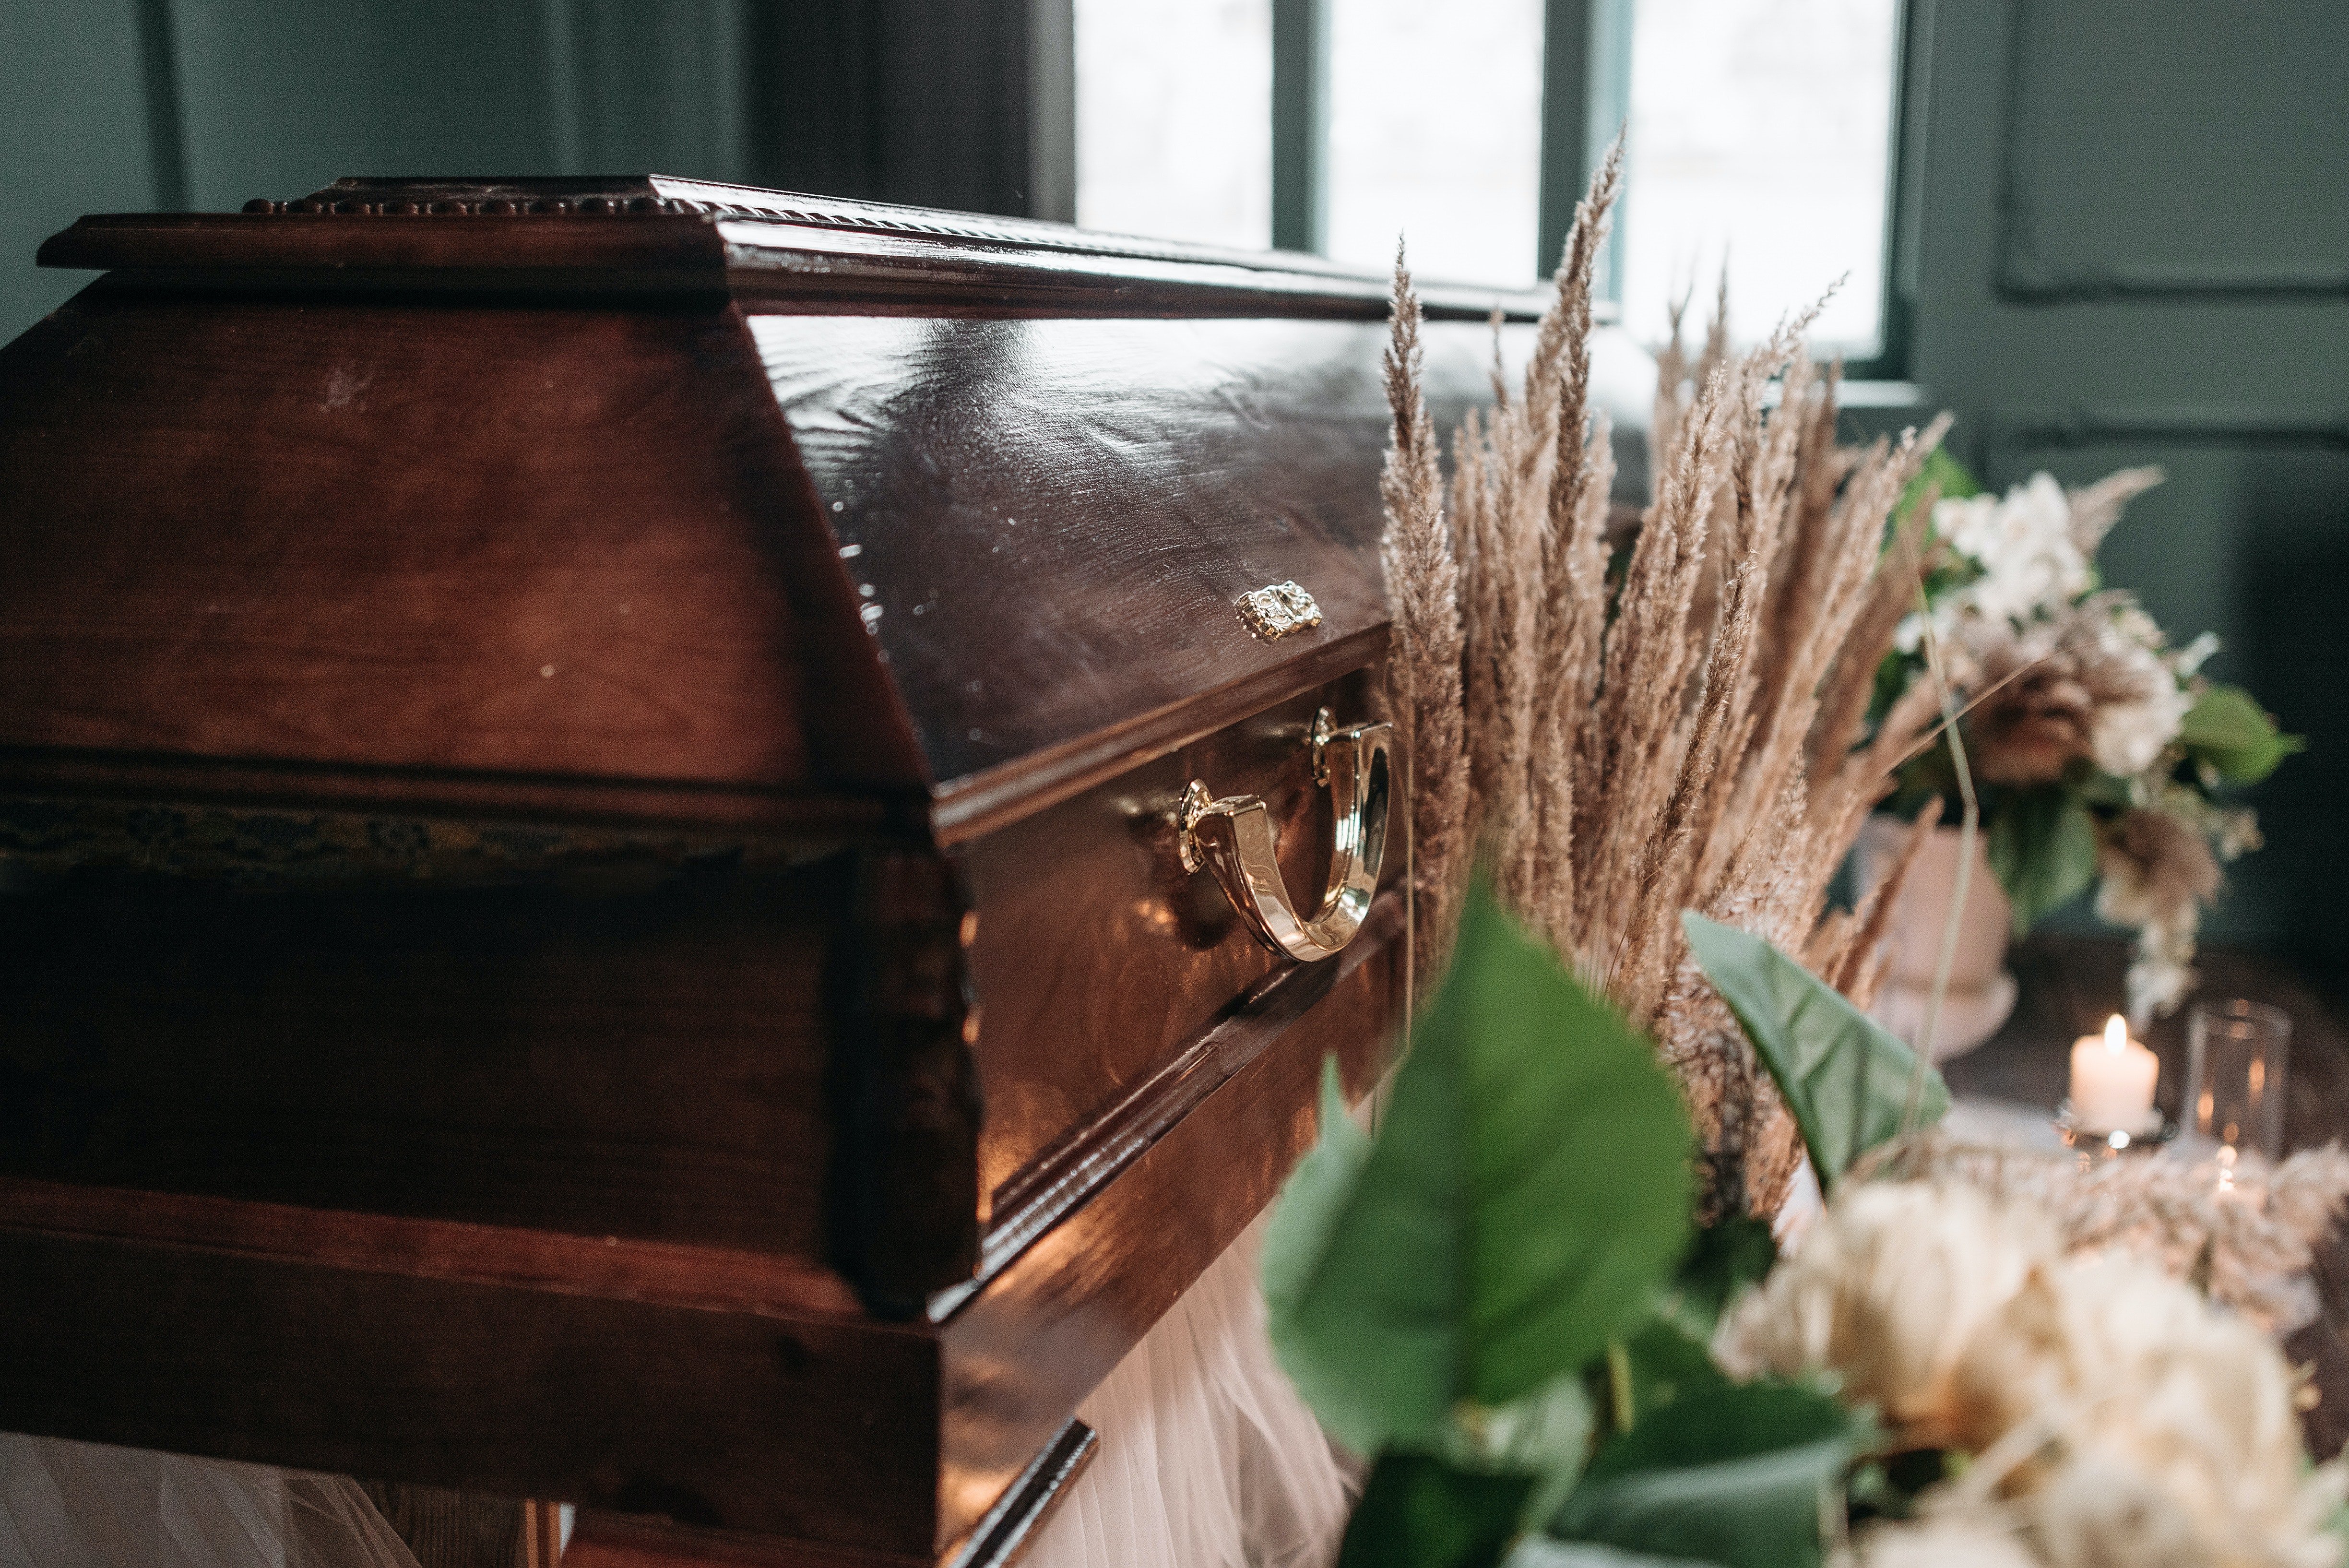 Alice went to Molly's funeral. | Source: Pexels